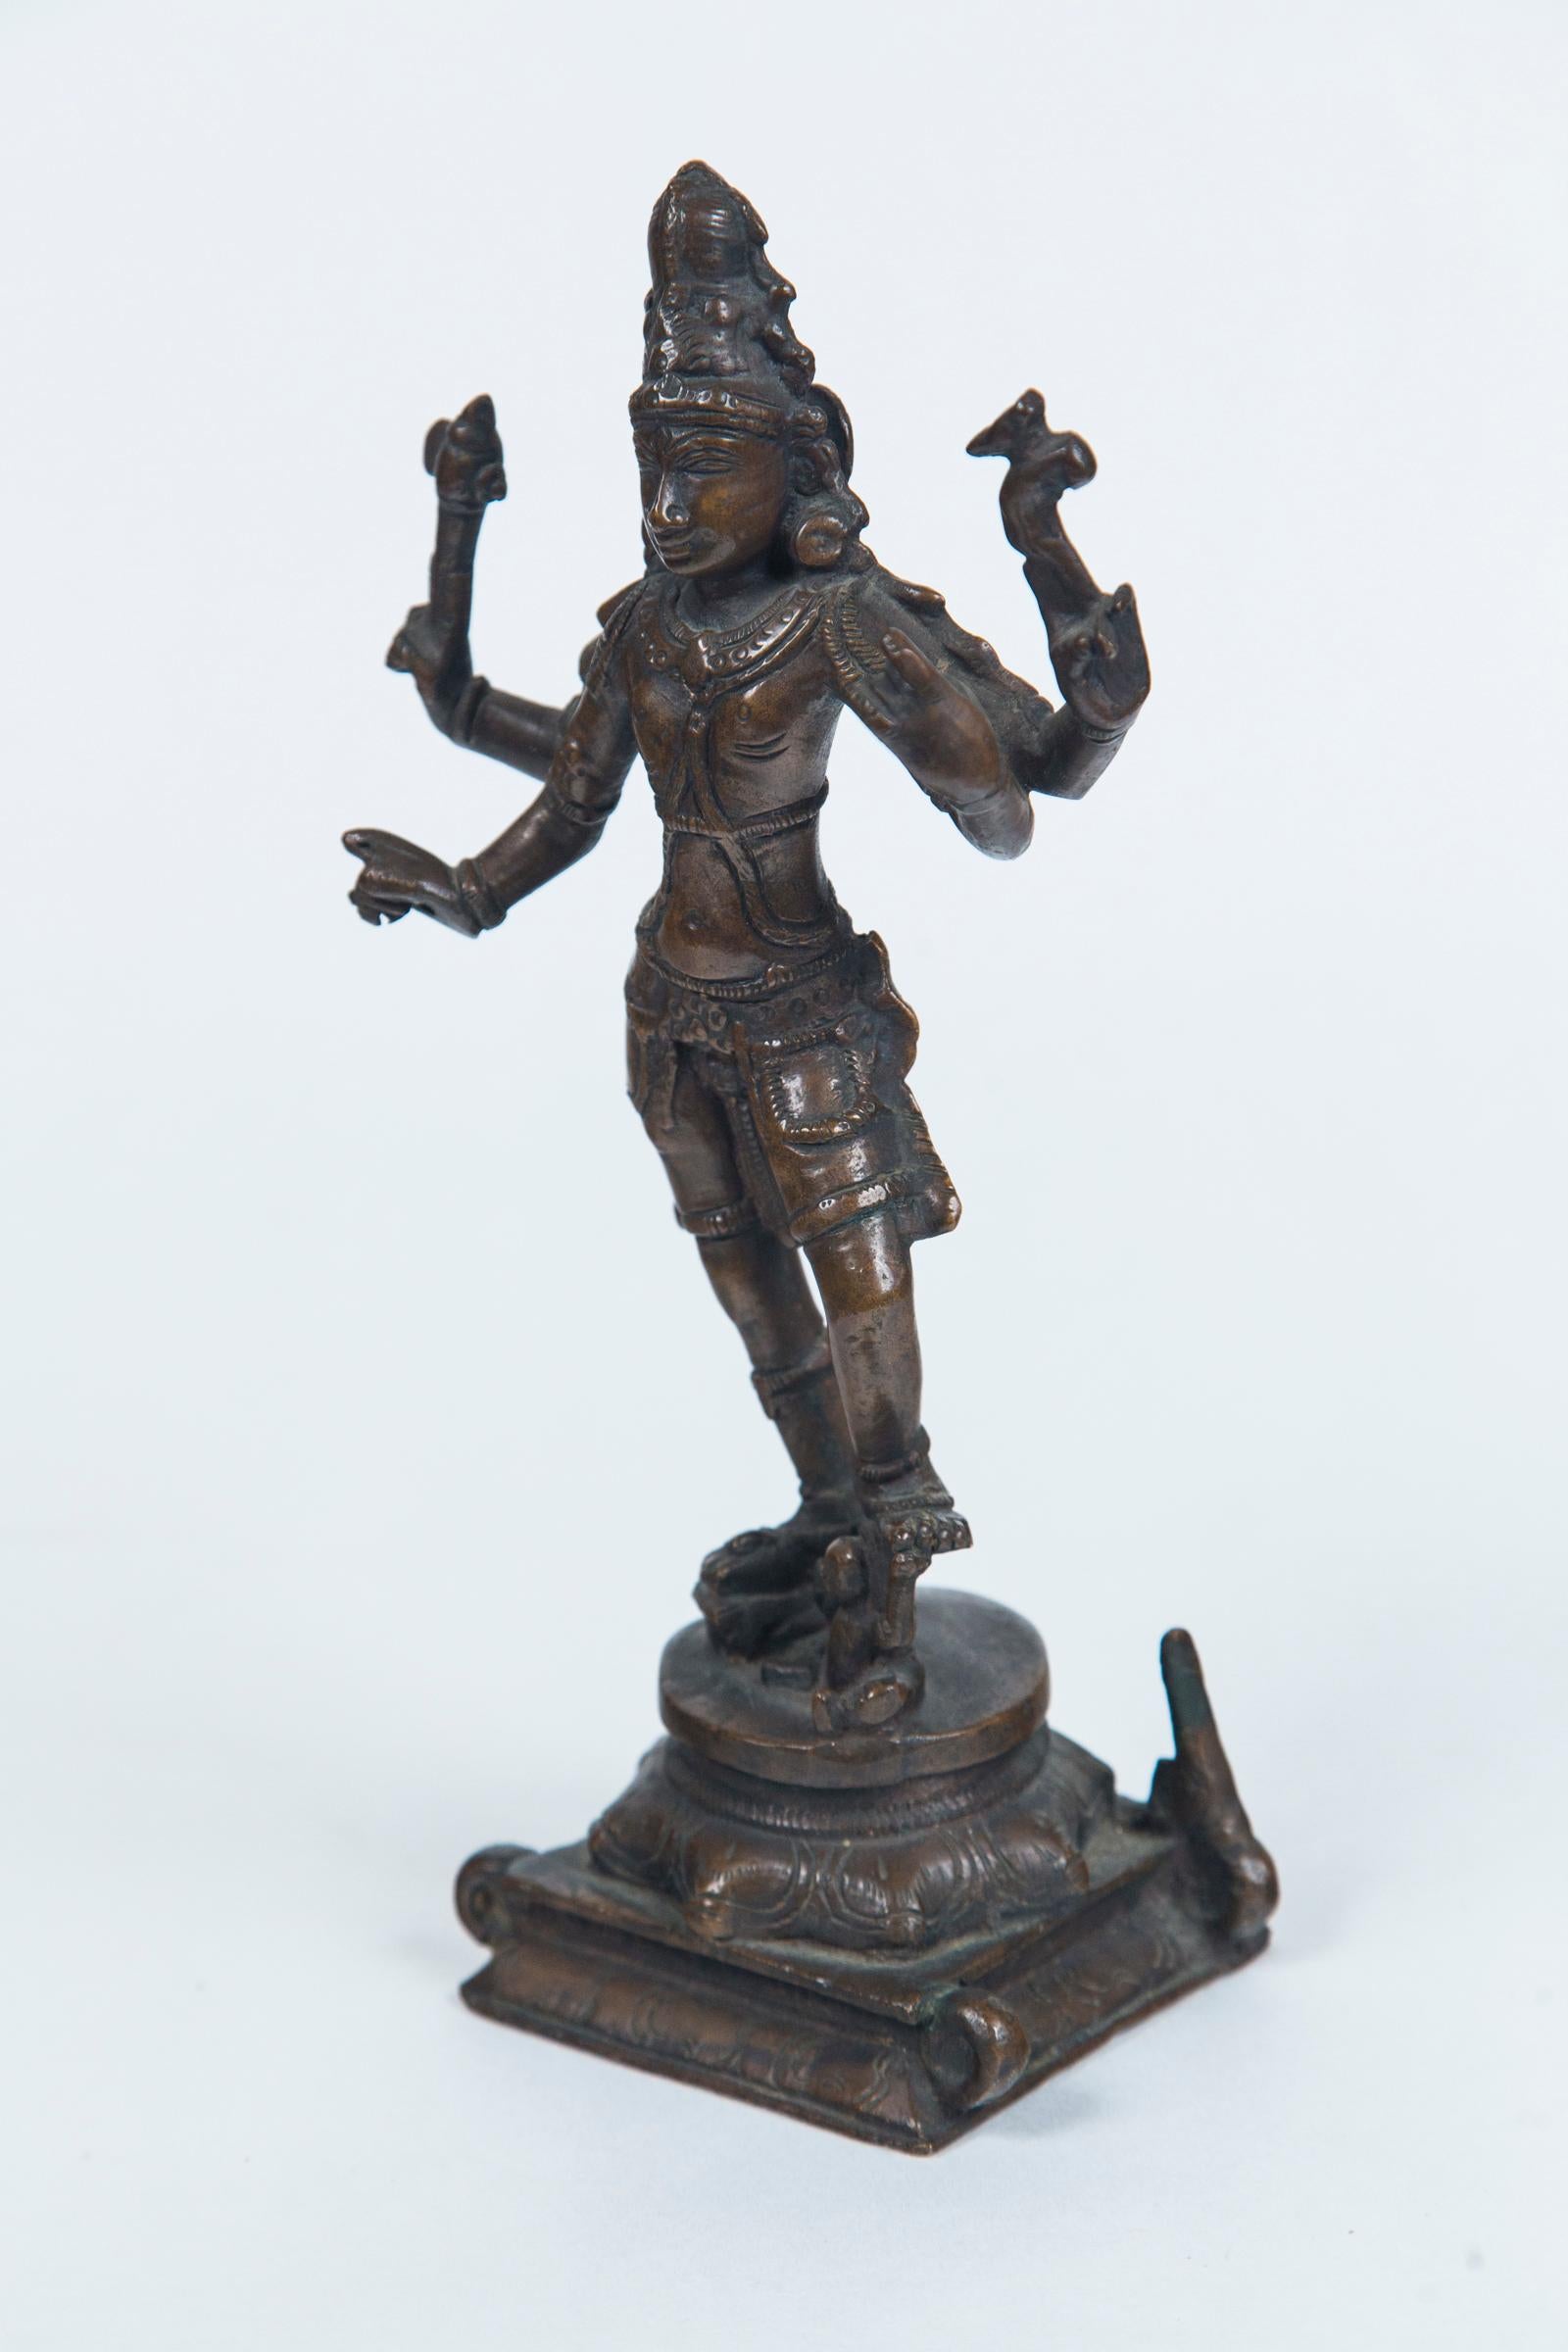 The 4 armed bronze Shiva holding symbols of his powers. His left foot rests on a demon. He wears an ornate headress. Dark natural patina. Raised on a square base.